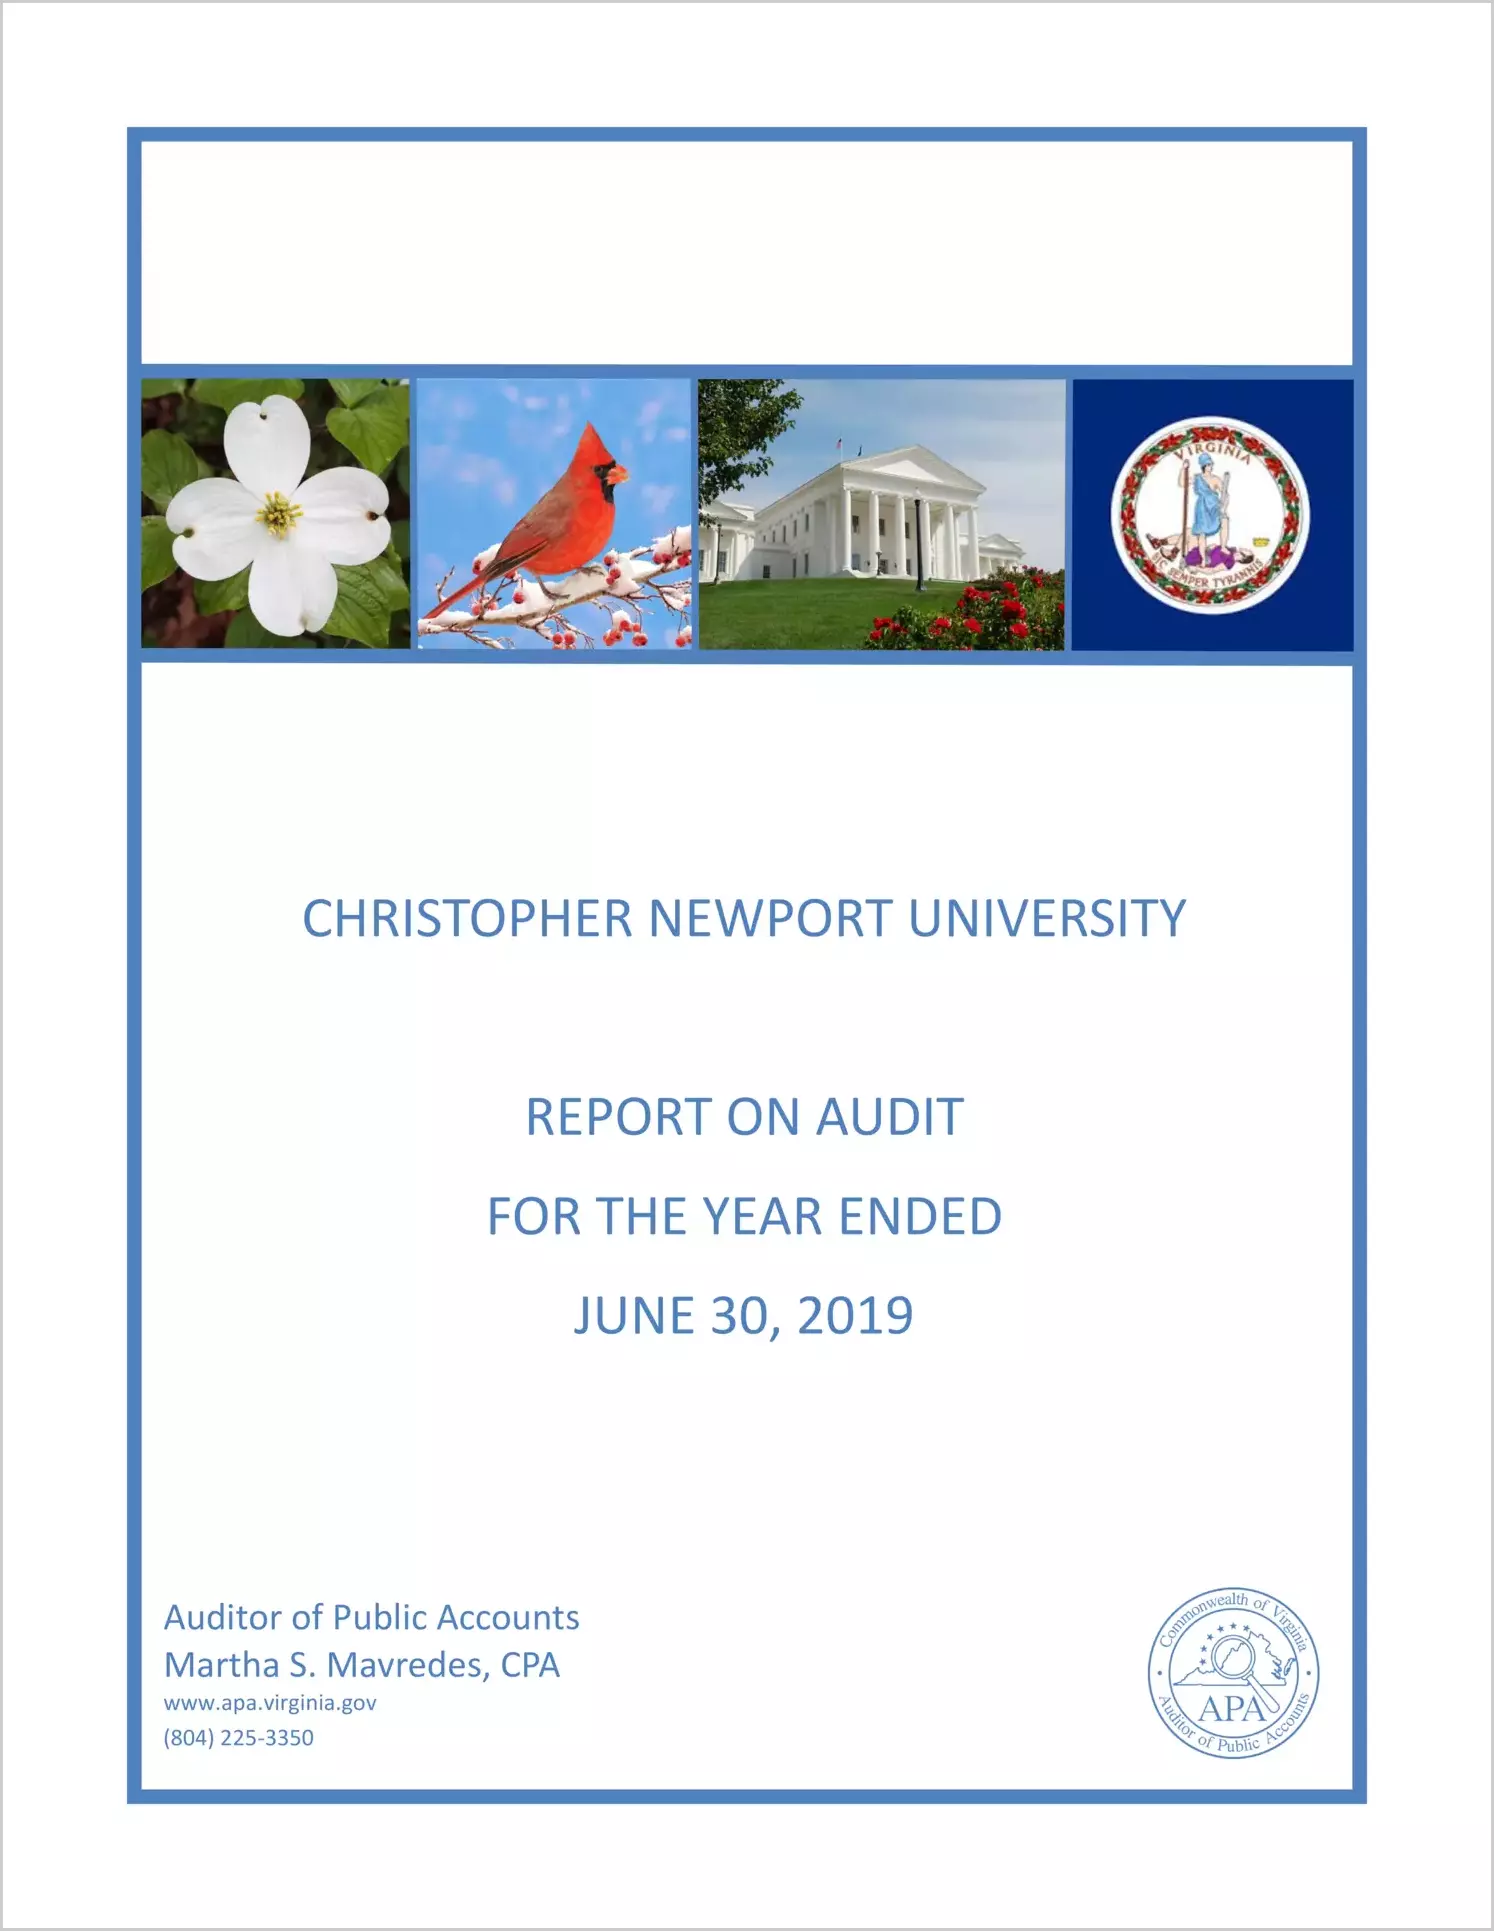 Christopher Newport University for the year ended June 30, 2019